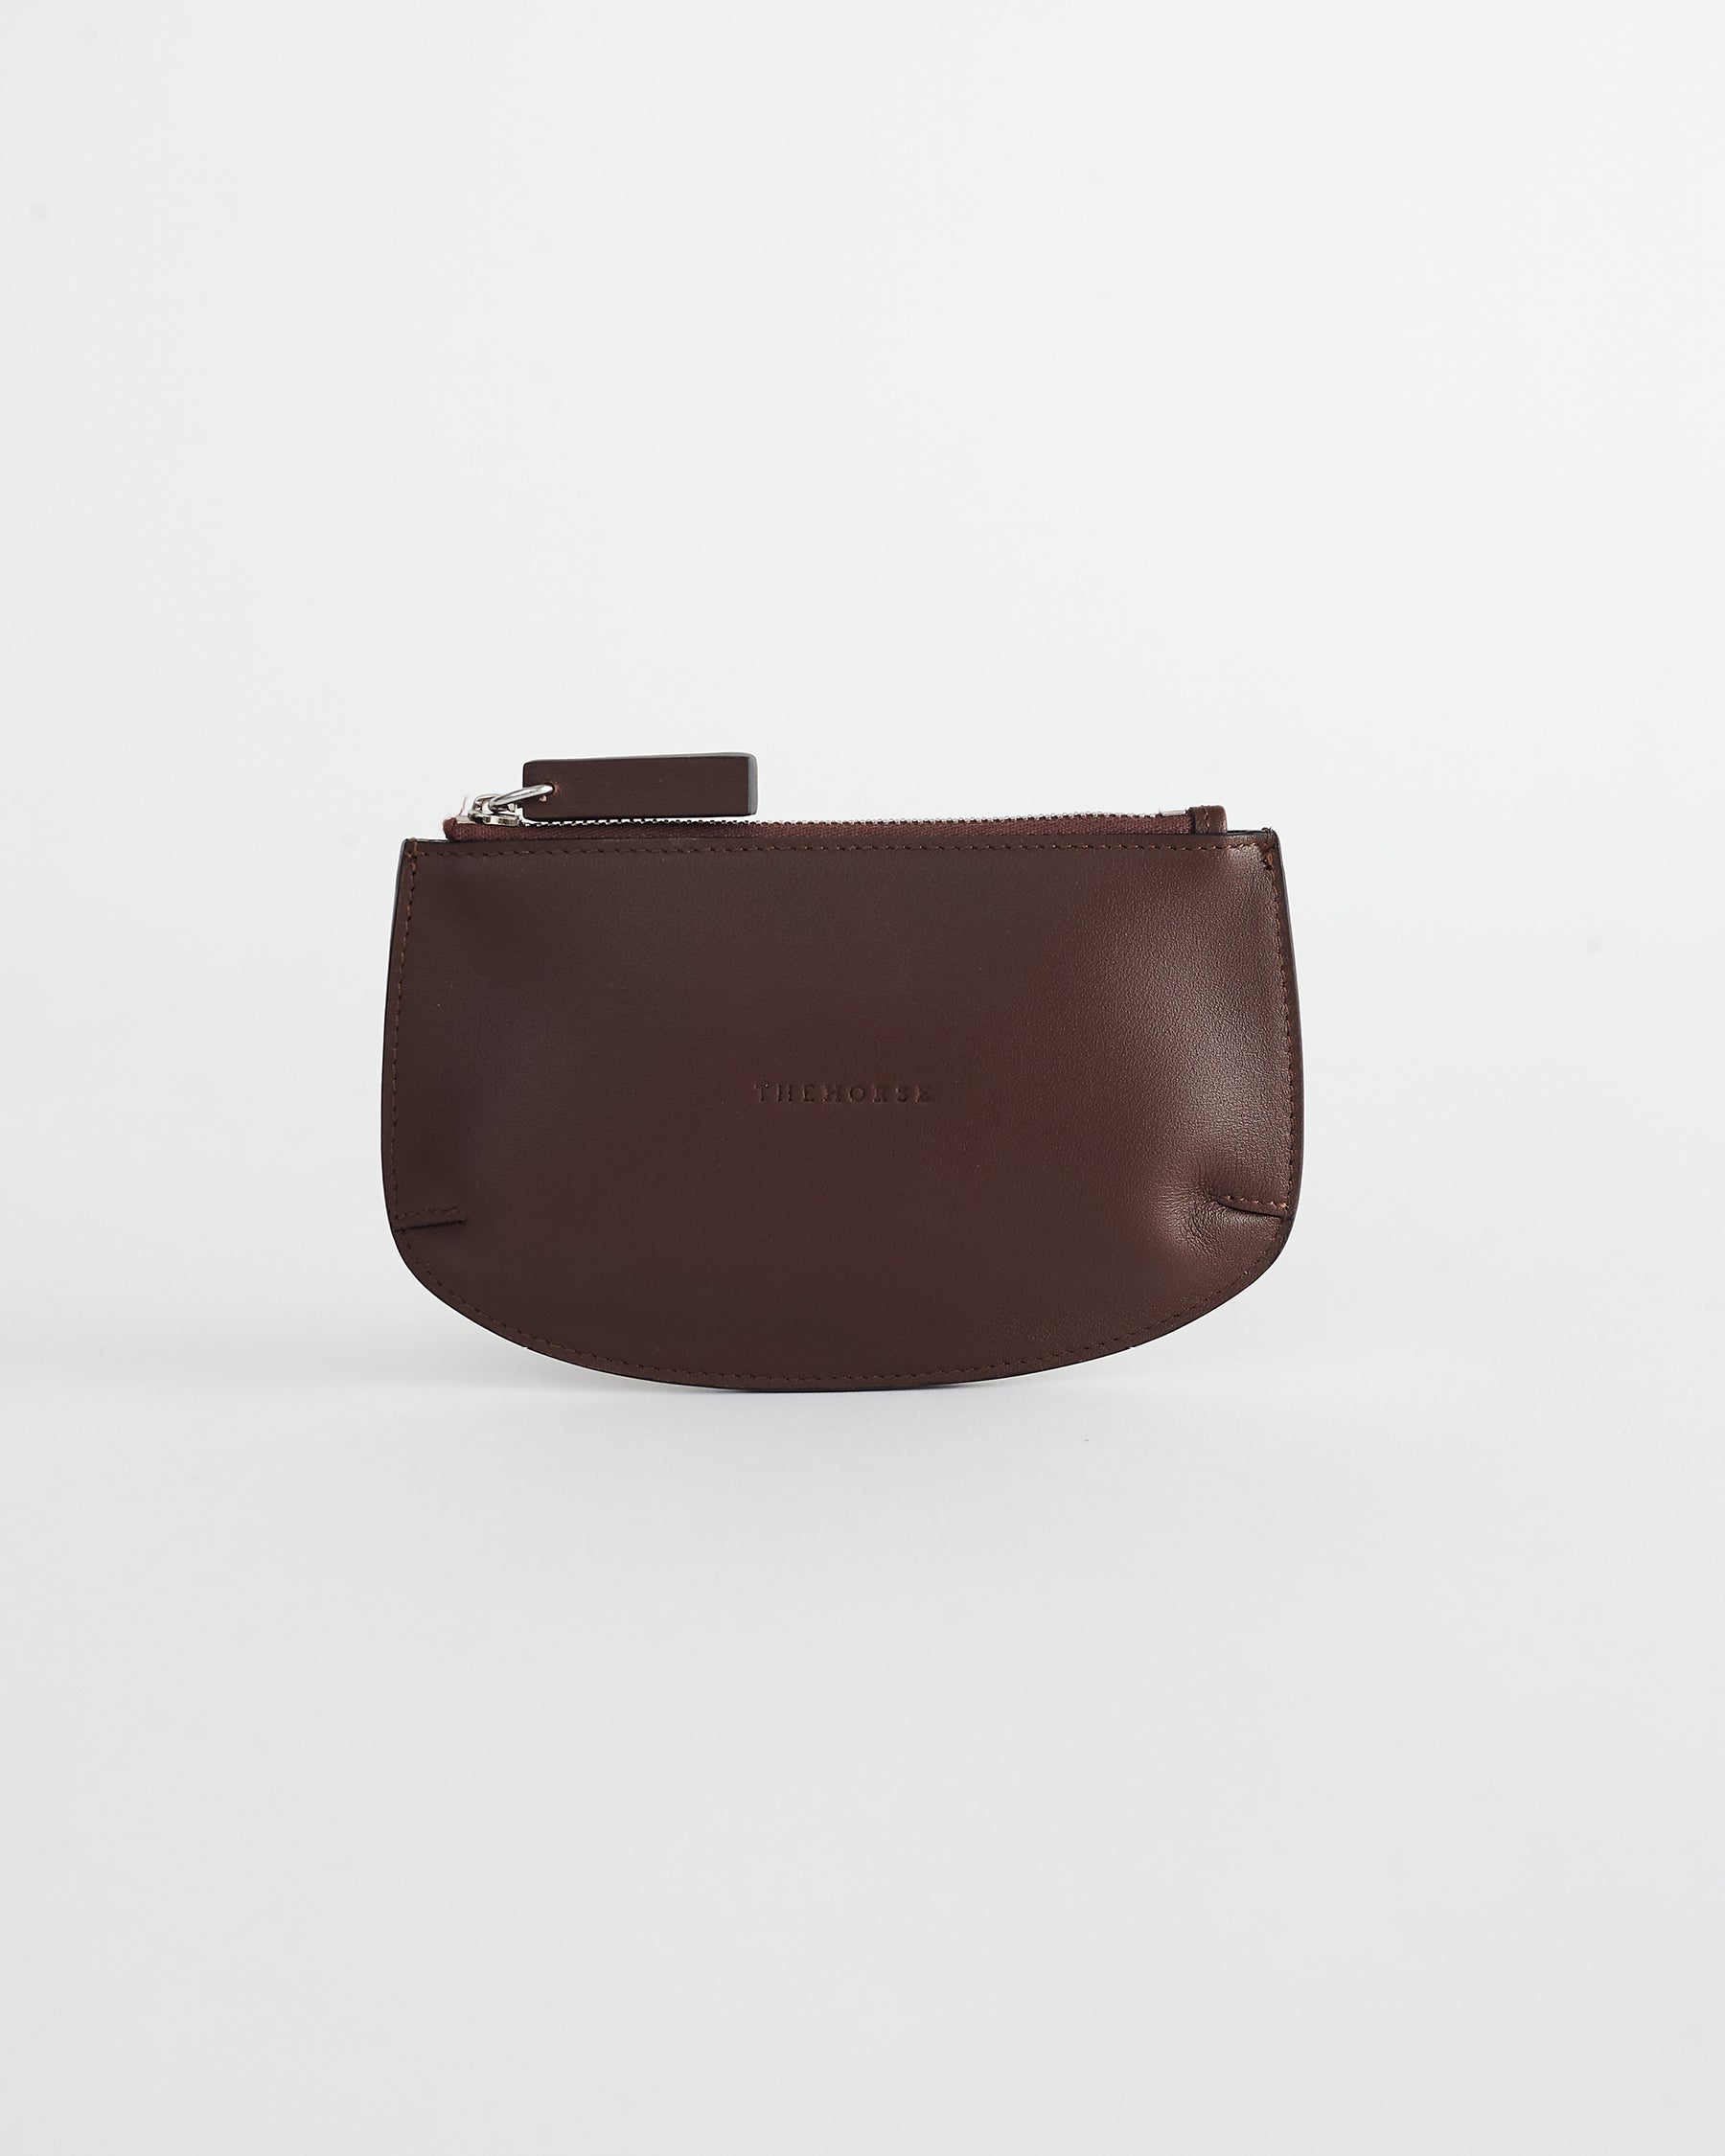 The Drew Women's Leather Zip Cardholder in Coffee by The Horse®